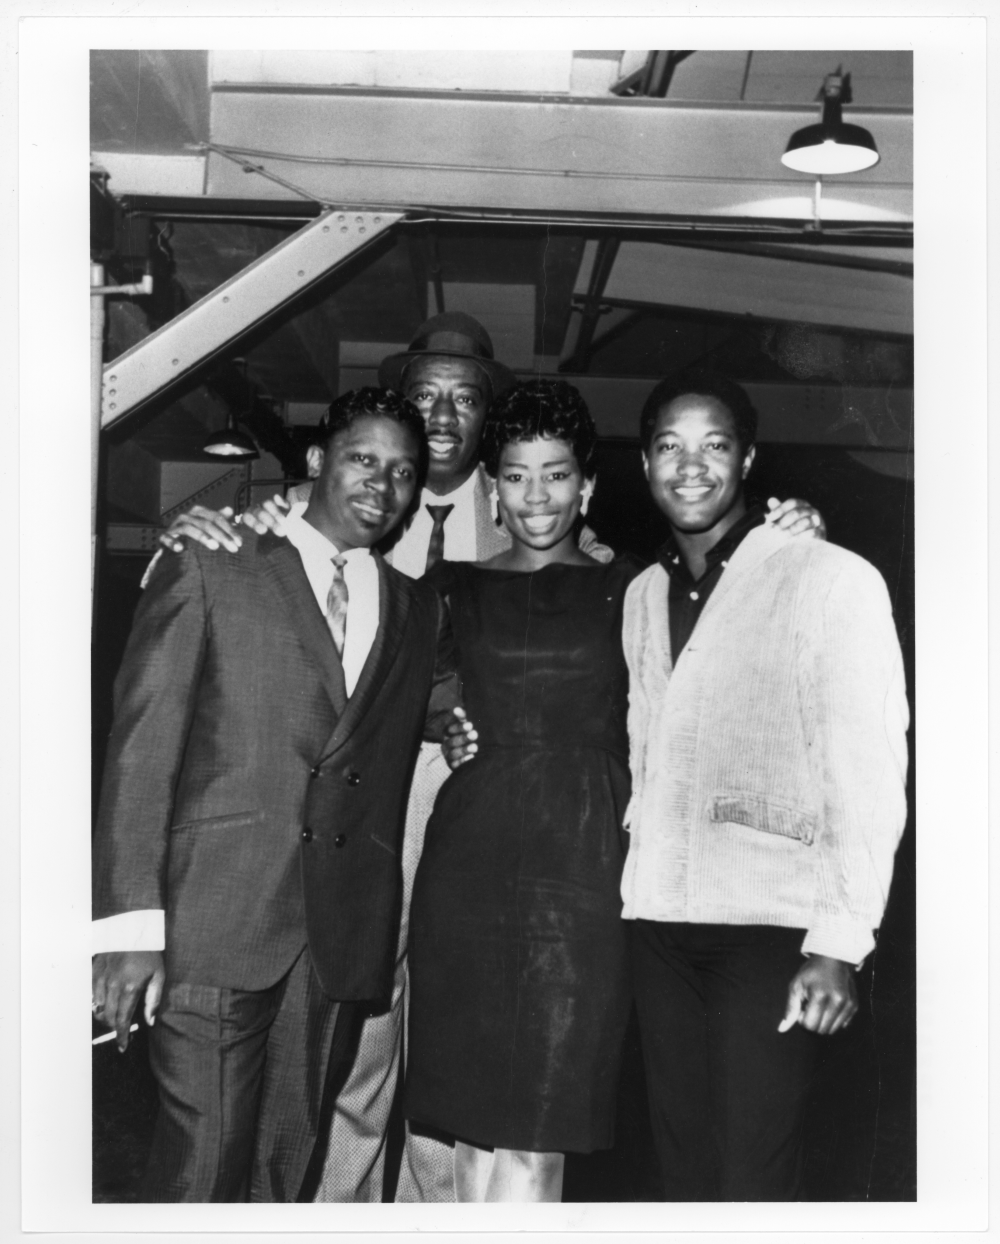 KYOK deejay George Nelson with Sam Cooke and B.B. King